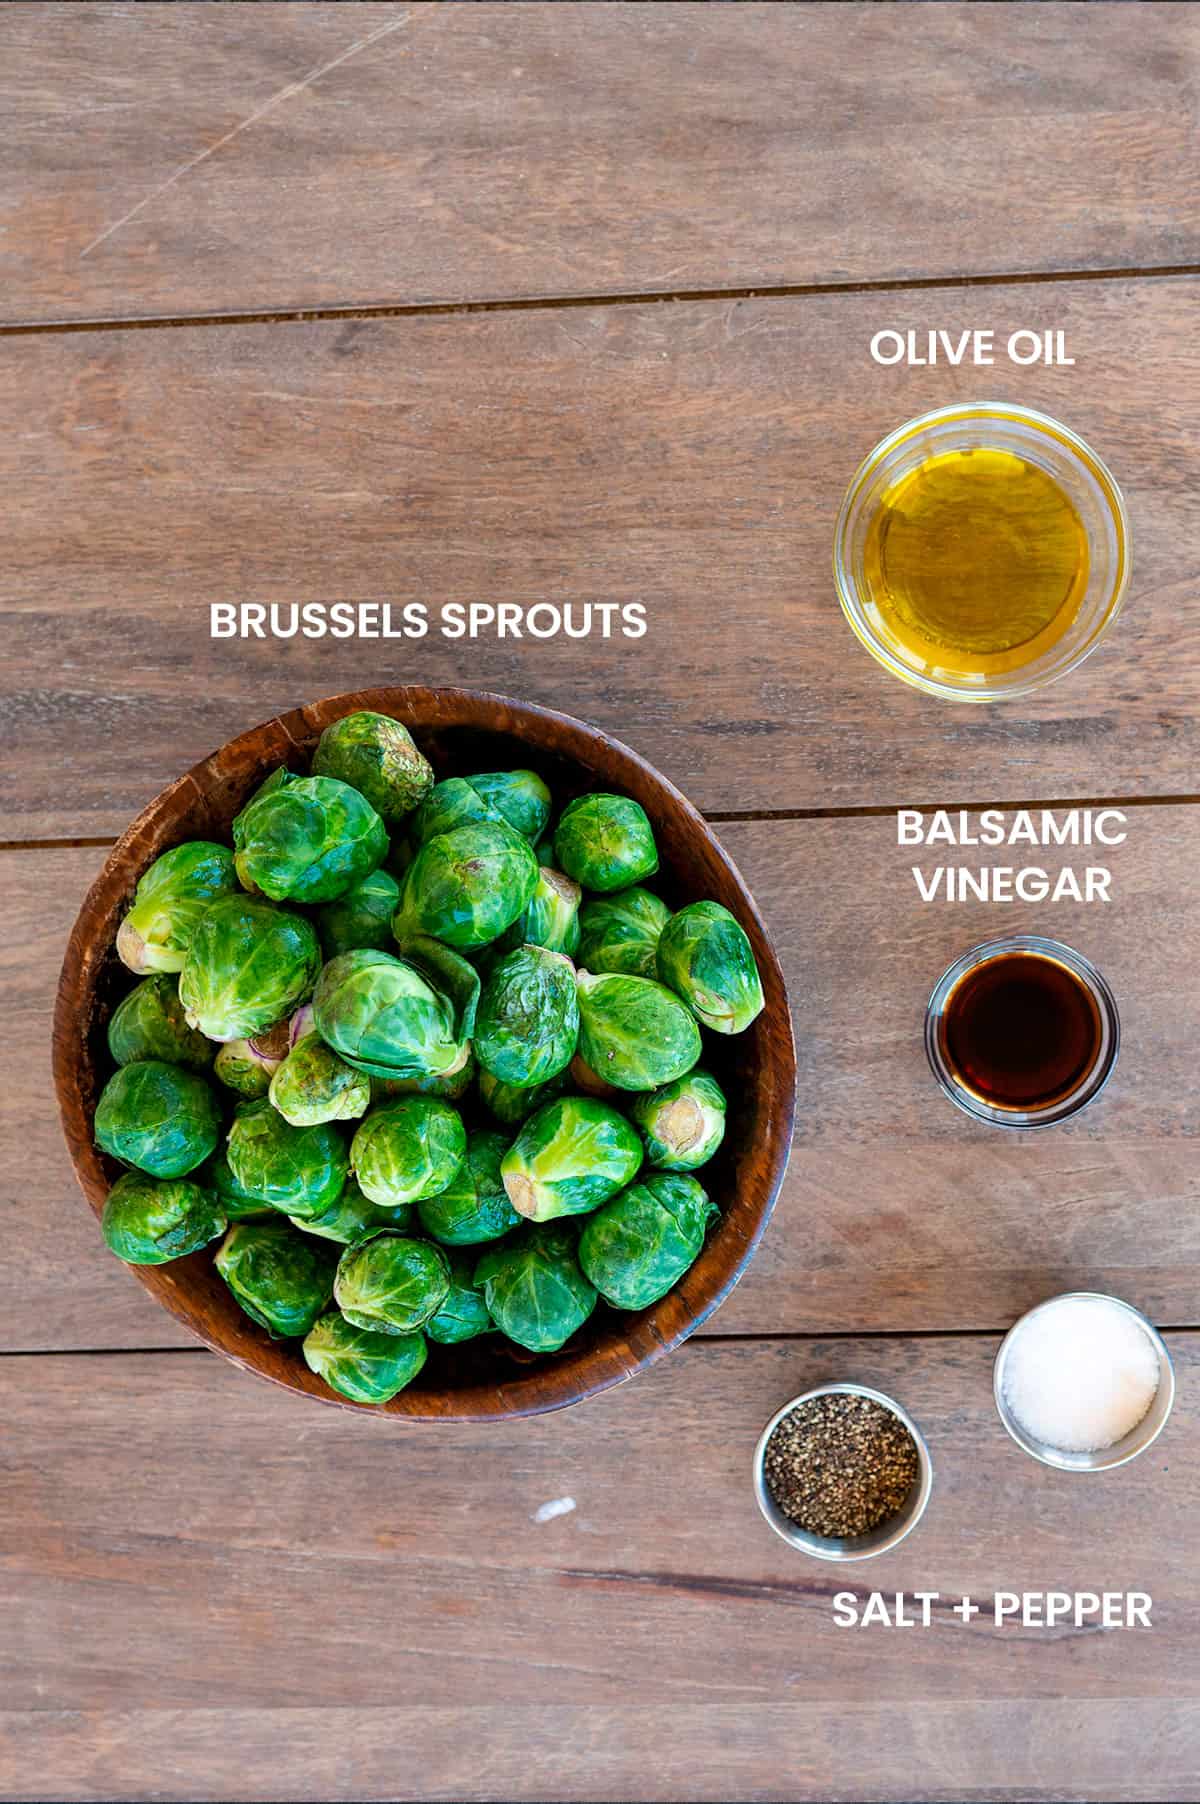 grilled brussels sprouts ingredients: brussels sprouts, olive oil, balsamic vinegar, salt and pepper.